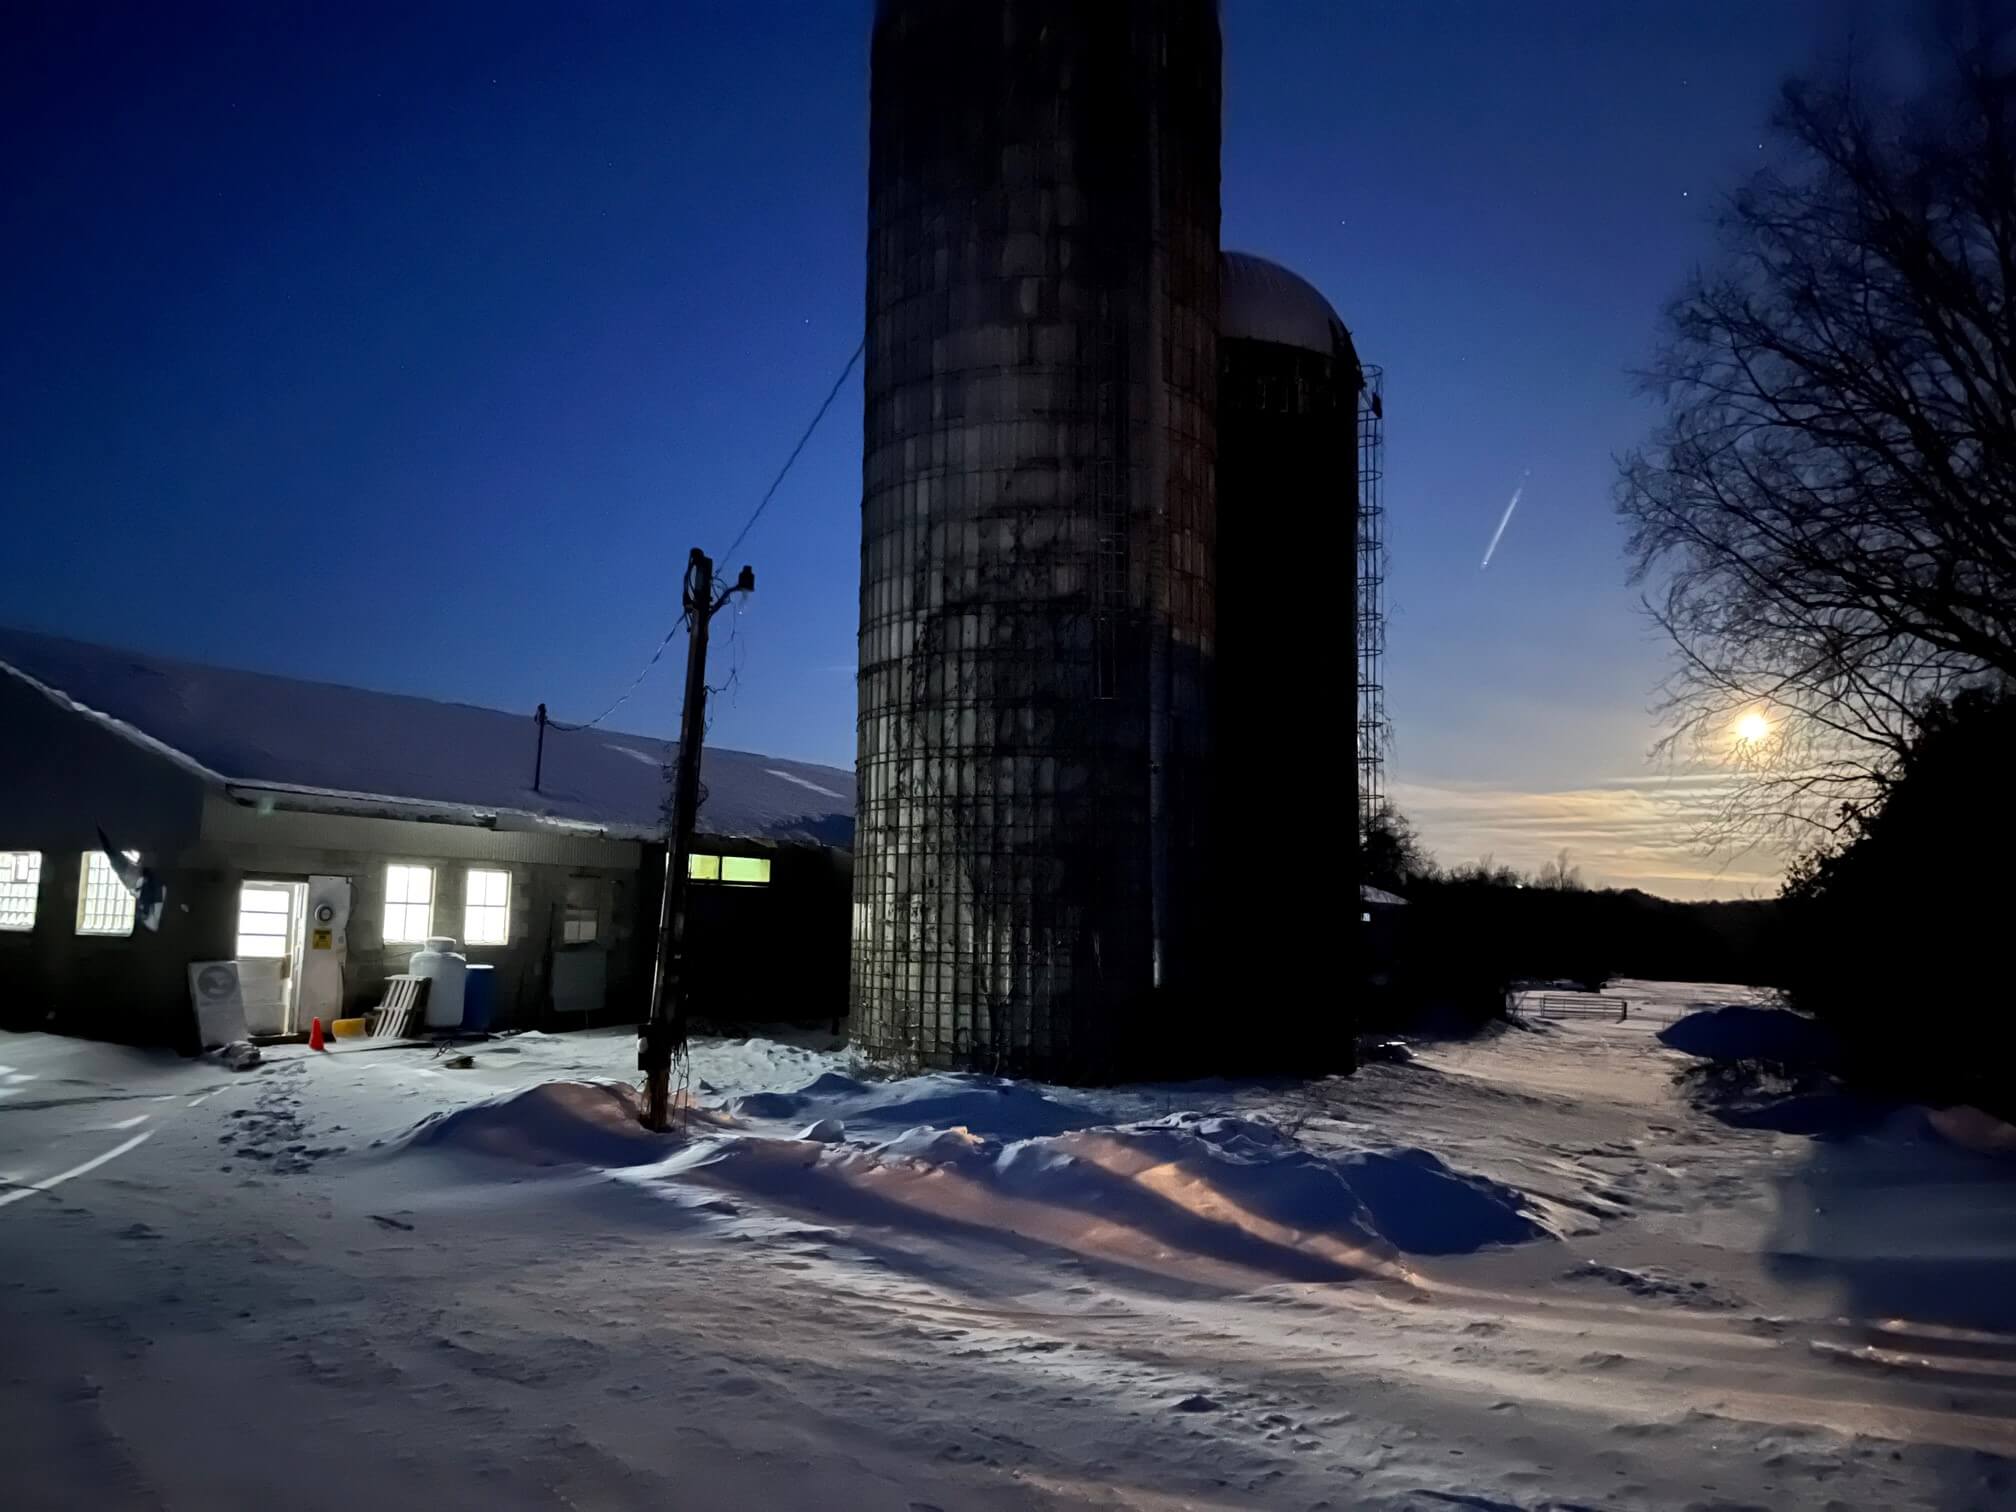 barn and silos in snow at dusk